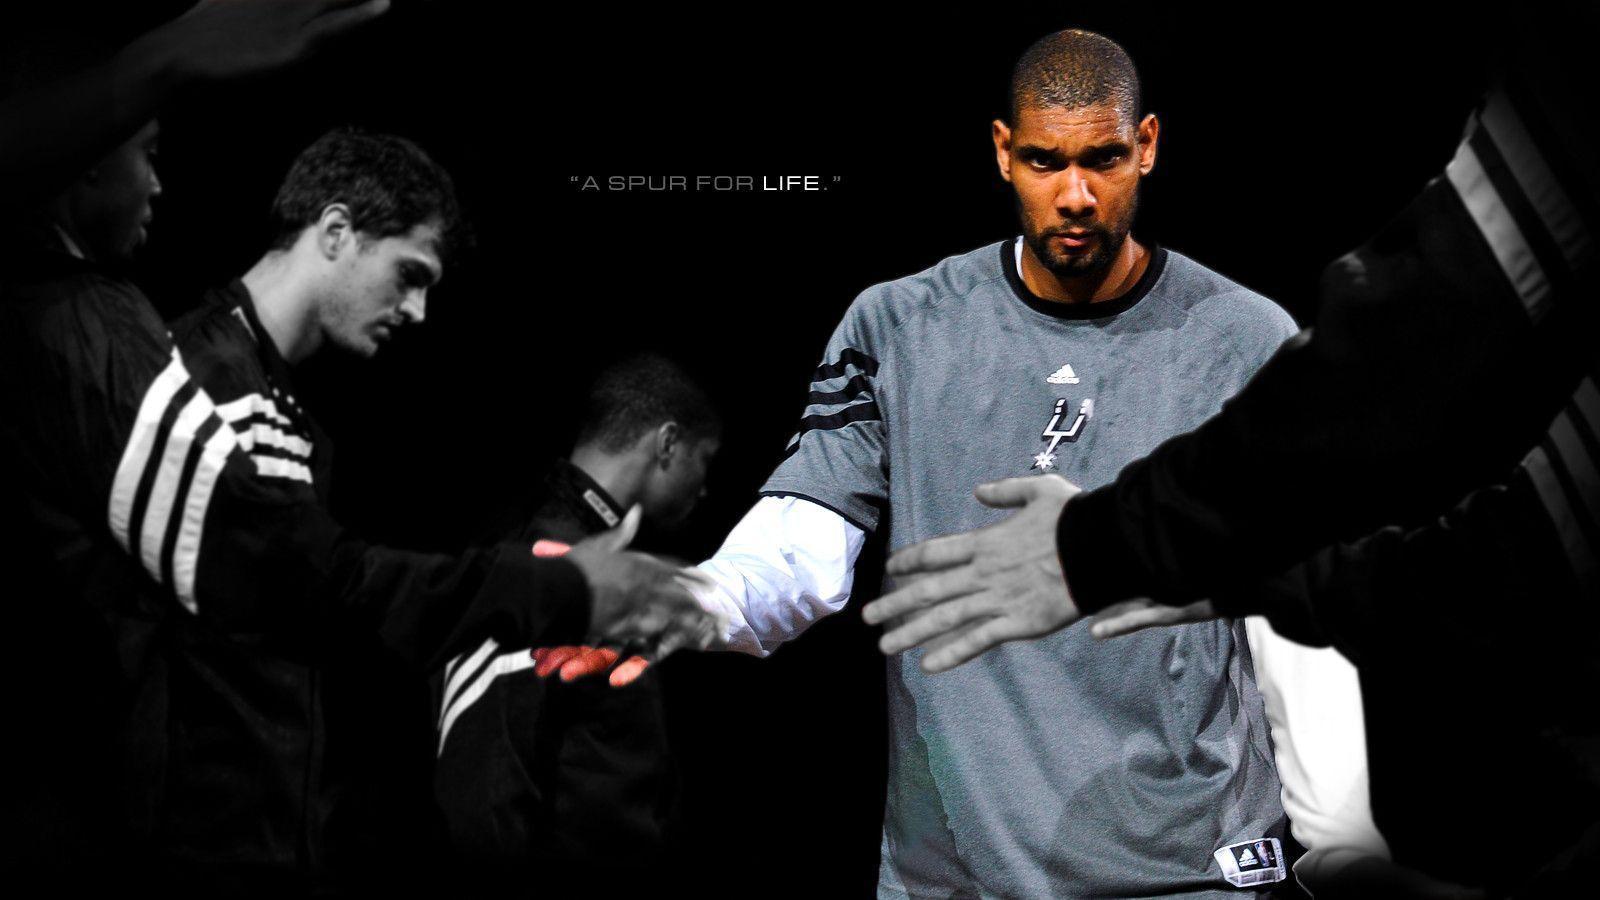 Duncan Computer Wallpaper. THE OFFICIAL SITE OF THE SAN ANTONIO